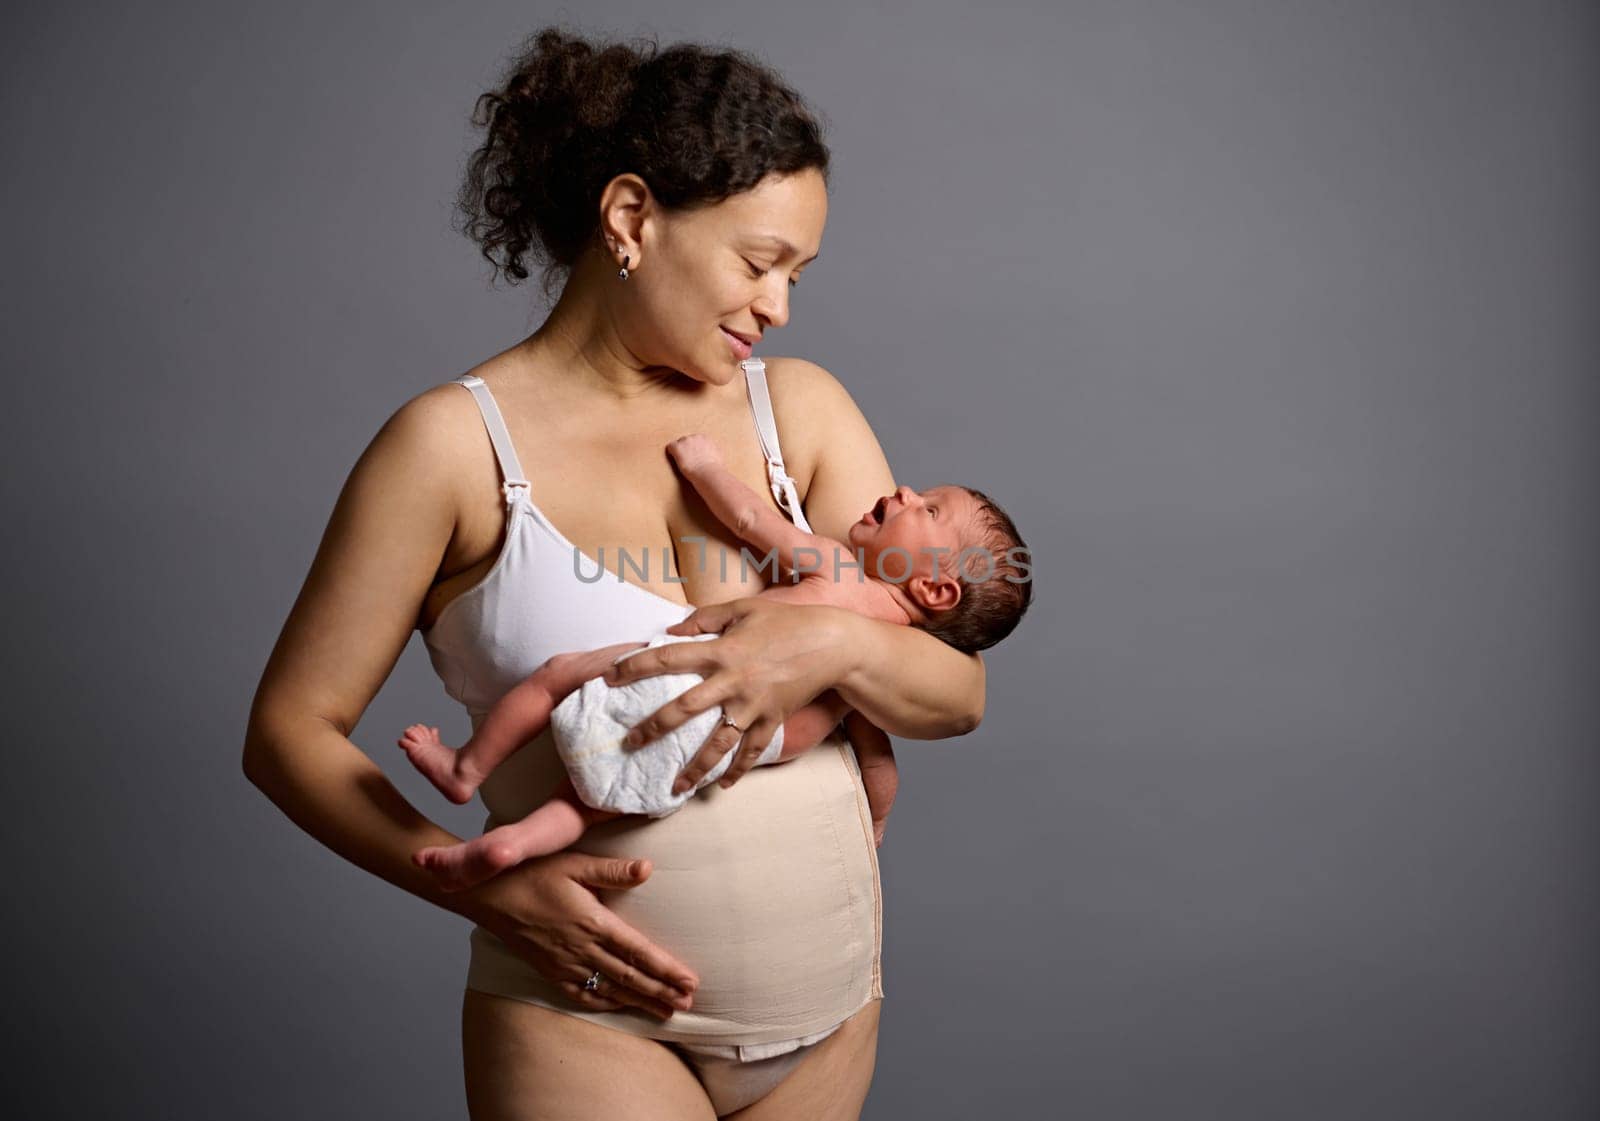 African happy mother in underwear and elastic bandage on her belly after c-section, holding and smiling looking at her newborn baby, isolated over gray studio background with free advertising space